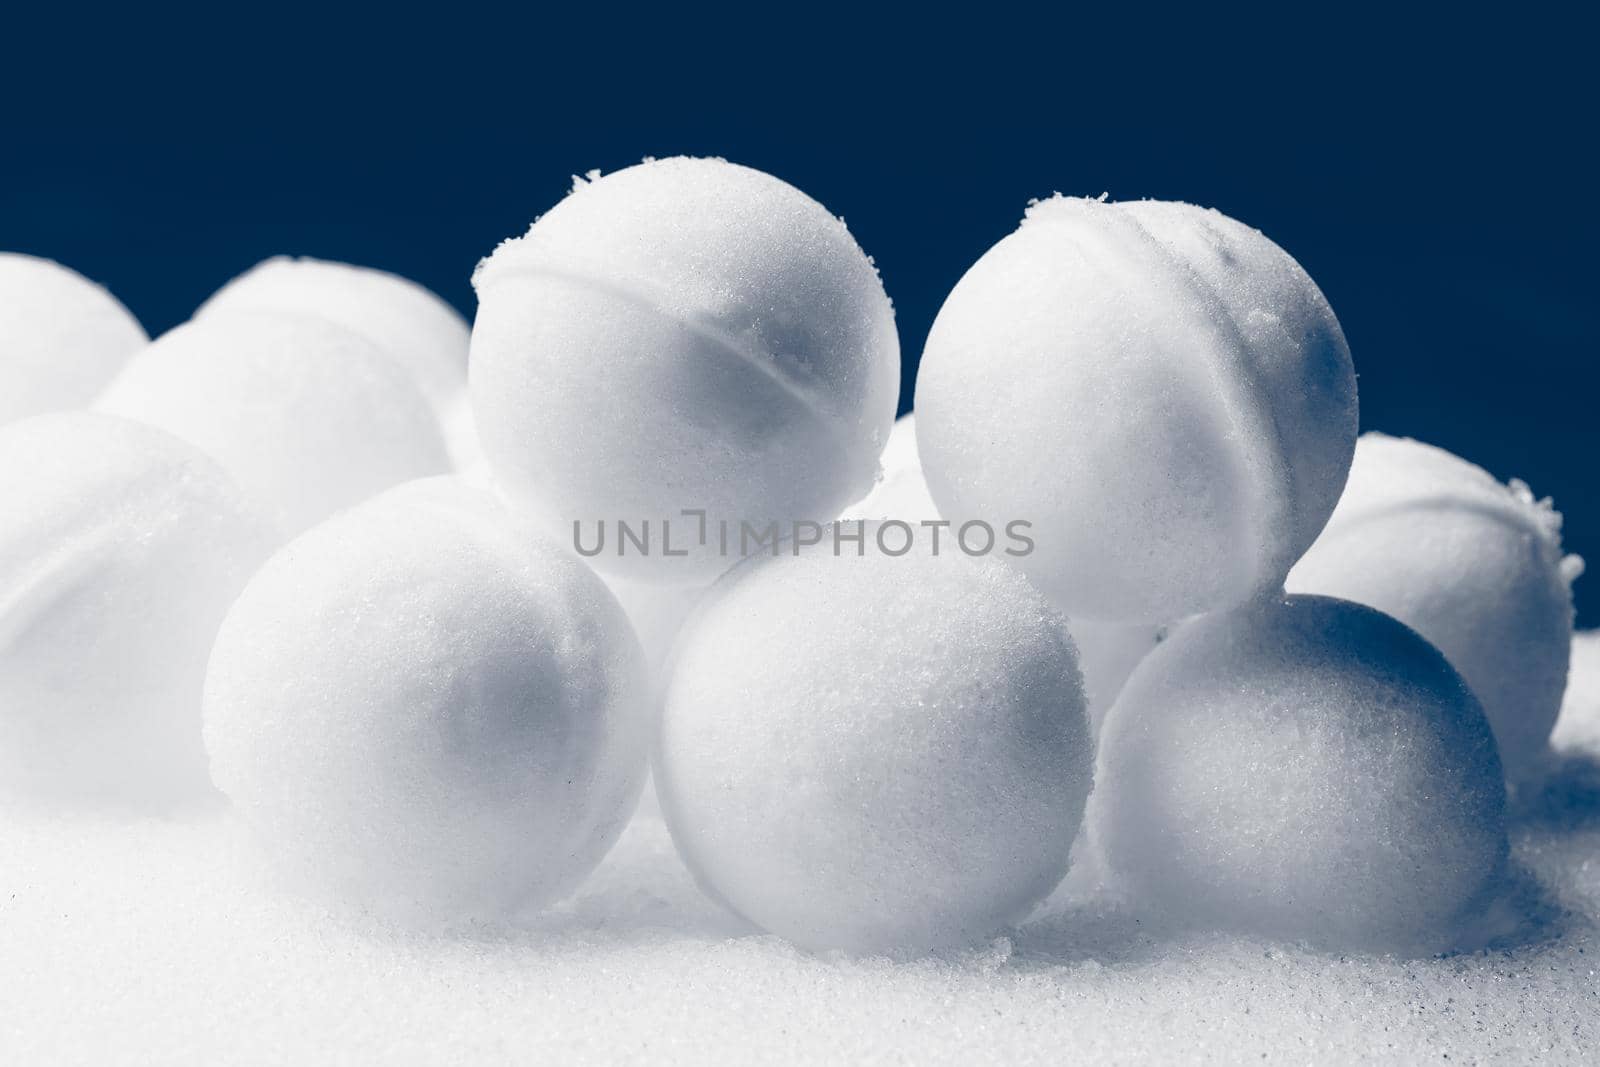 snowballs are ready for the battle, close-up view by nikkytok